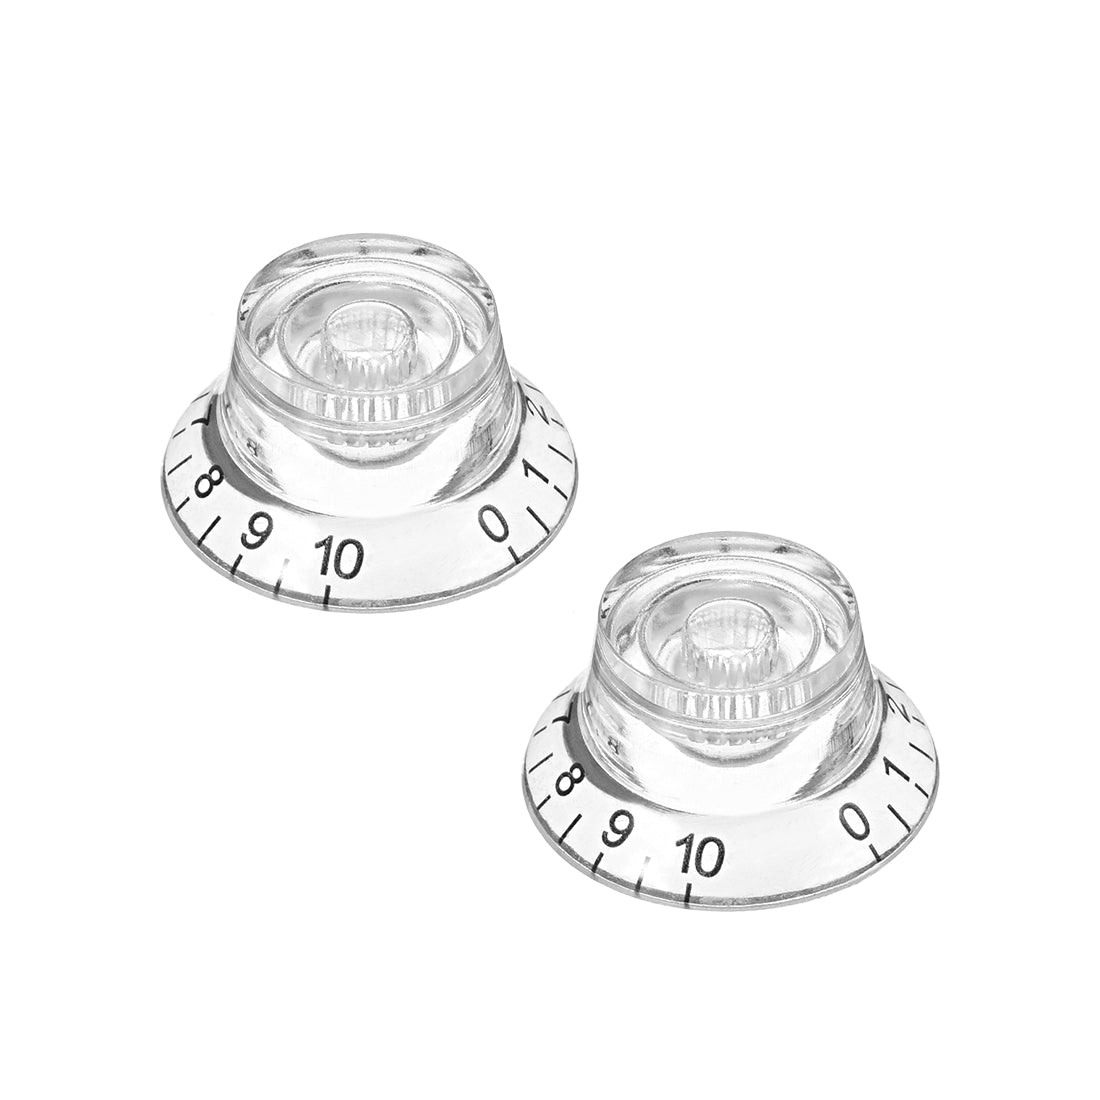 Uxcell Uxcell 2pcs 6mm Potentiometer Control Knobs For LP Electric Guitar Acrylic Volume Tone Knobs Amber Tone